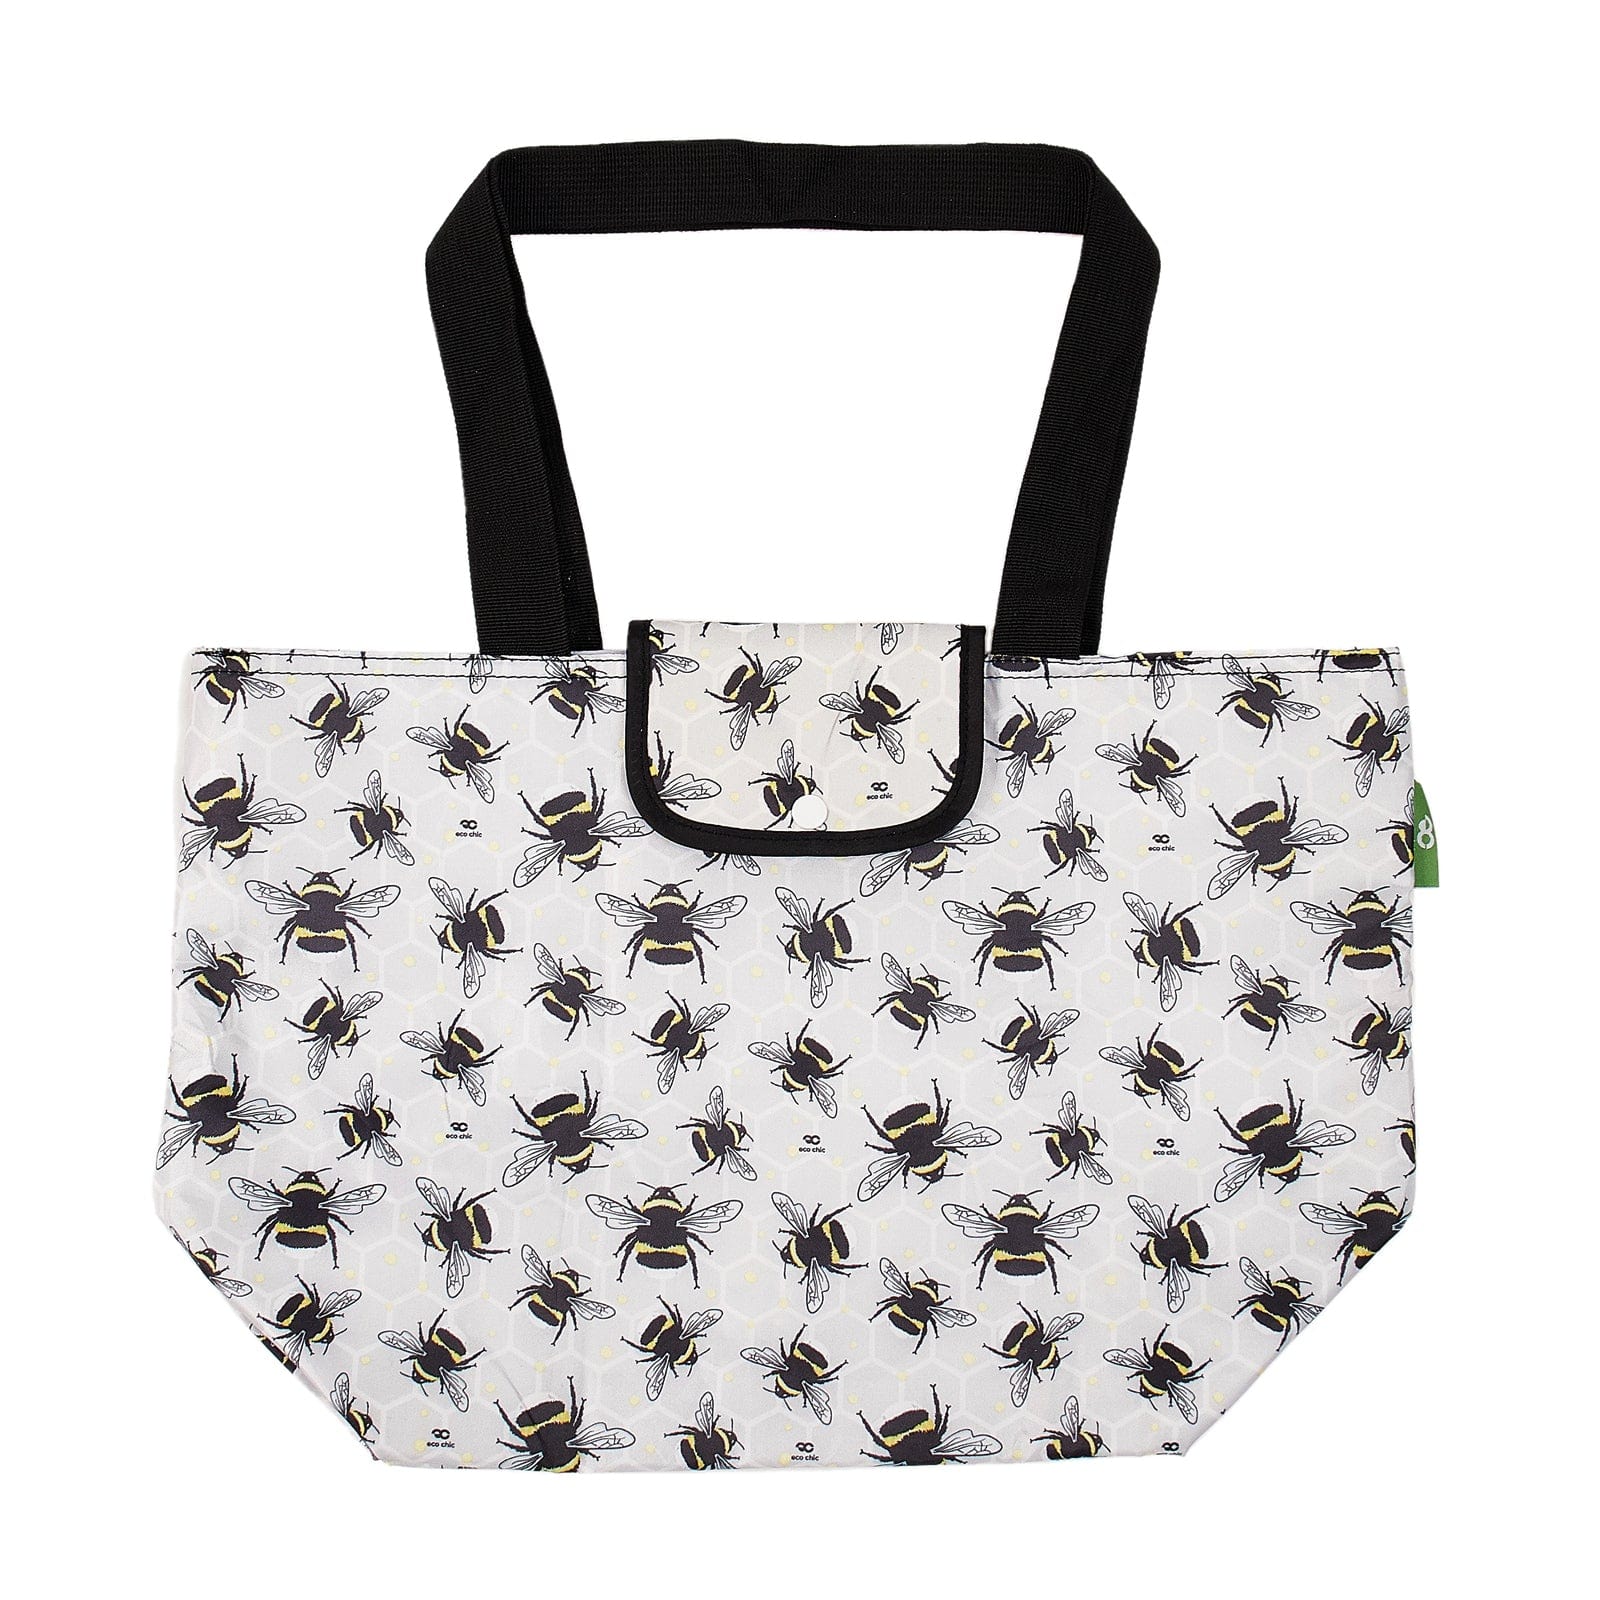 Eco Chic Black Eco Chic Lightweight Foldable Picnic Cool Bag Bumble Bees